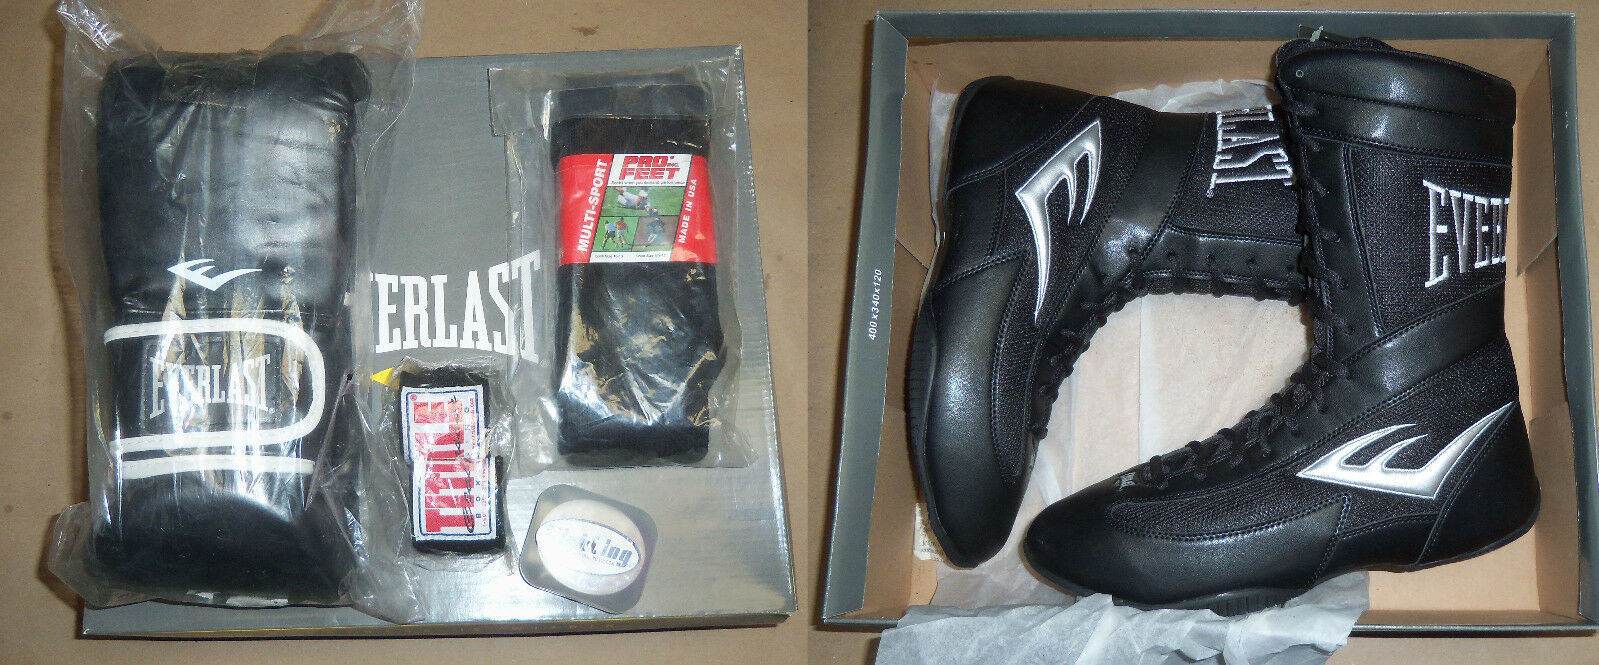 =NEW= Everlast Hydrolast Hi-Top Boxing Boots model 9011 Size 11, Gloves, Wraps.